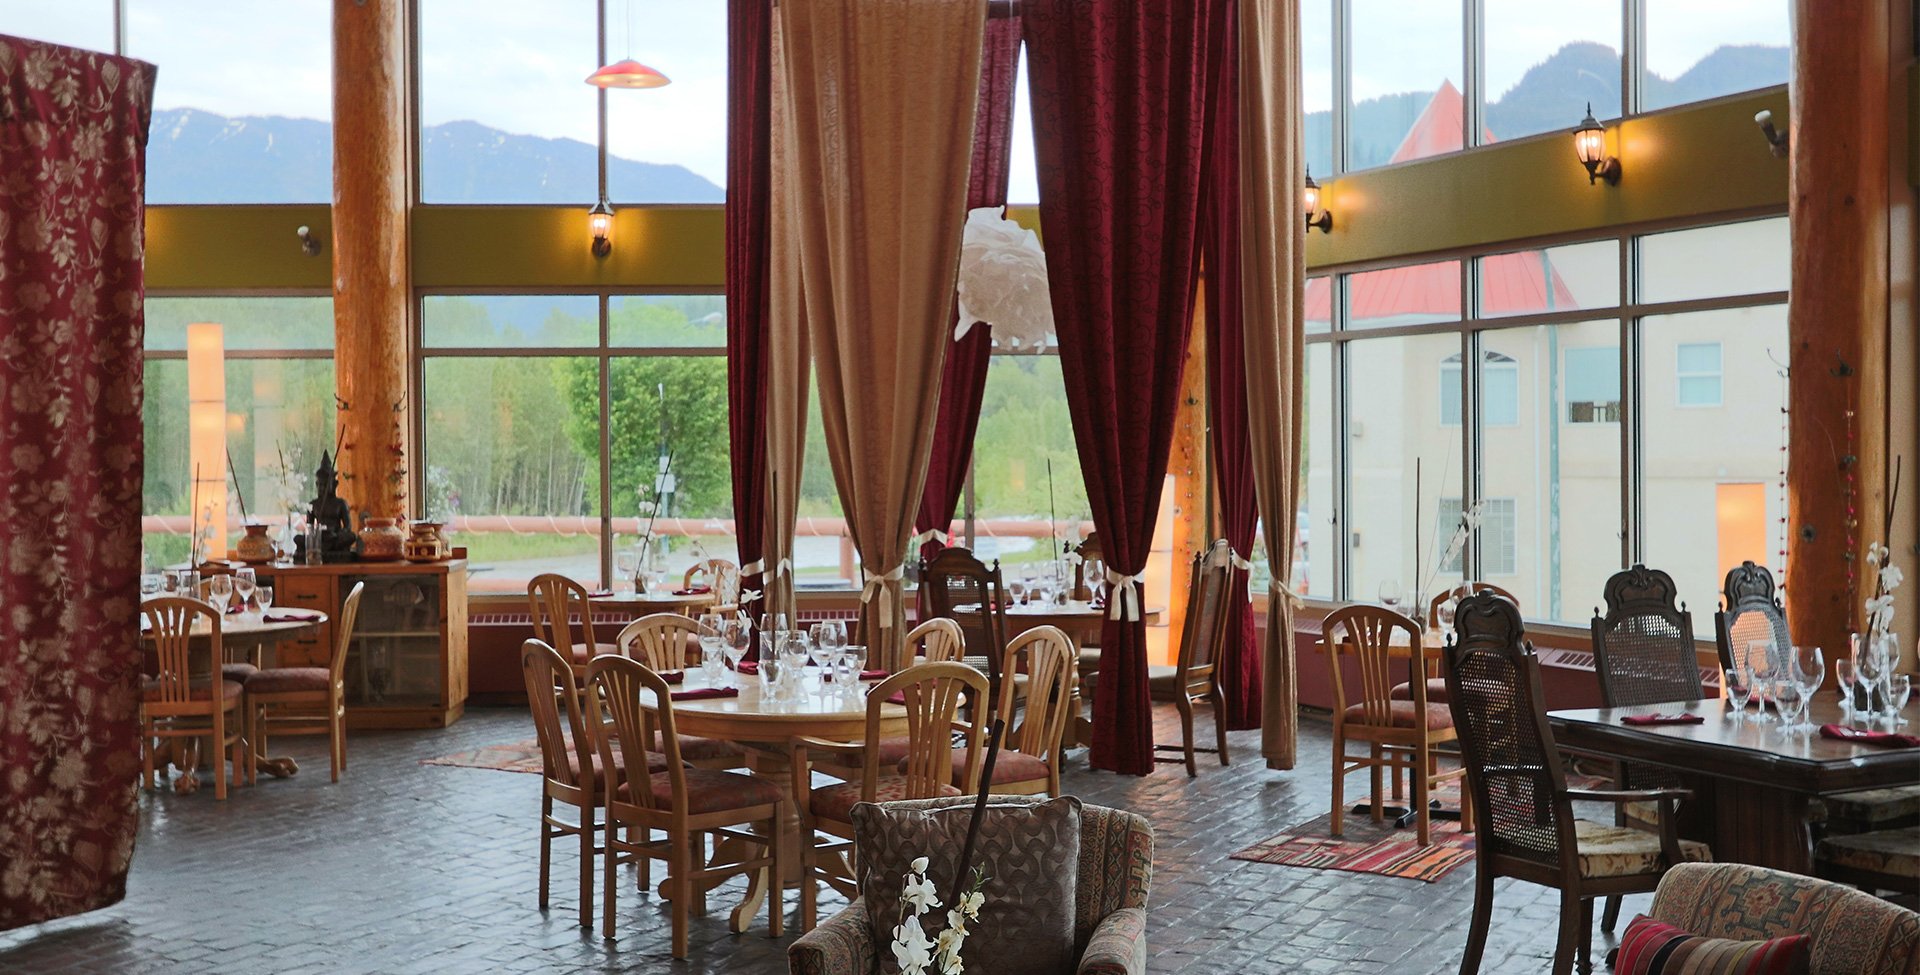 The dining room of the Tandoor & Grill Restaurant, located on the Stanford Fernie property showcases elegantly set tables placed before floor to ceiling windows reflecting scenic views of the Rocky Mountains with red and beige privacy curtains suspended from above.